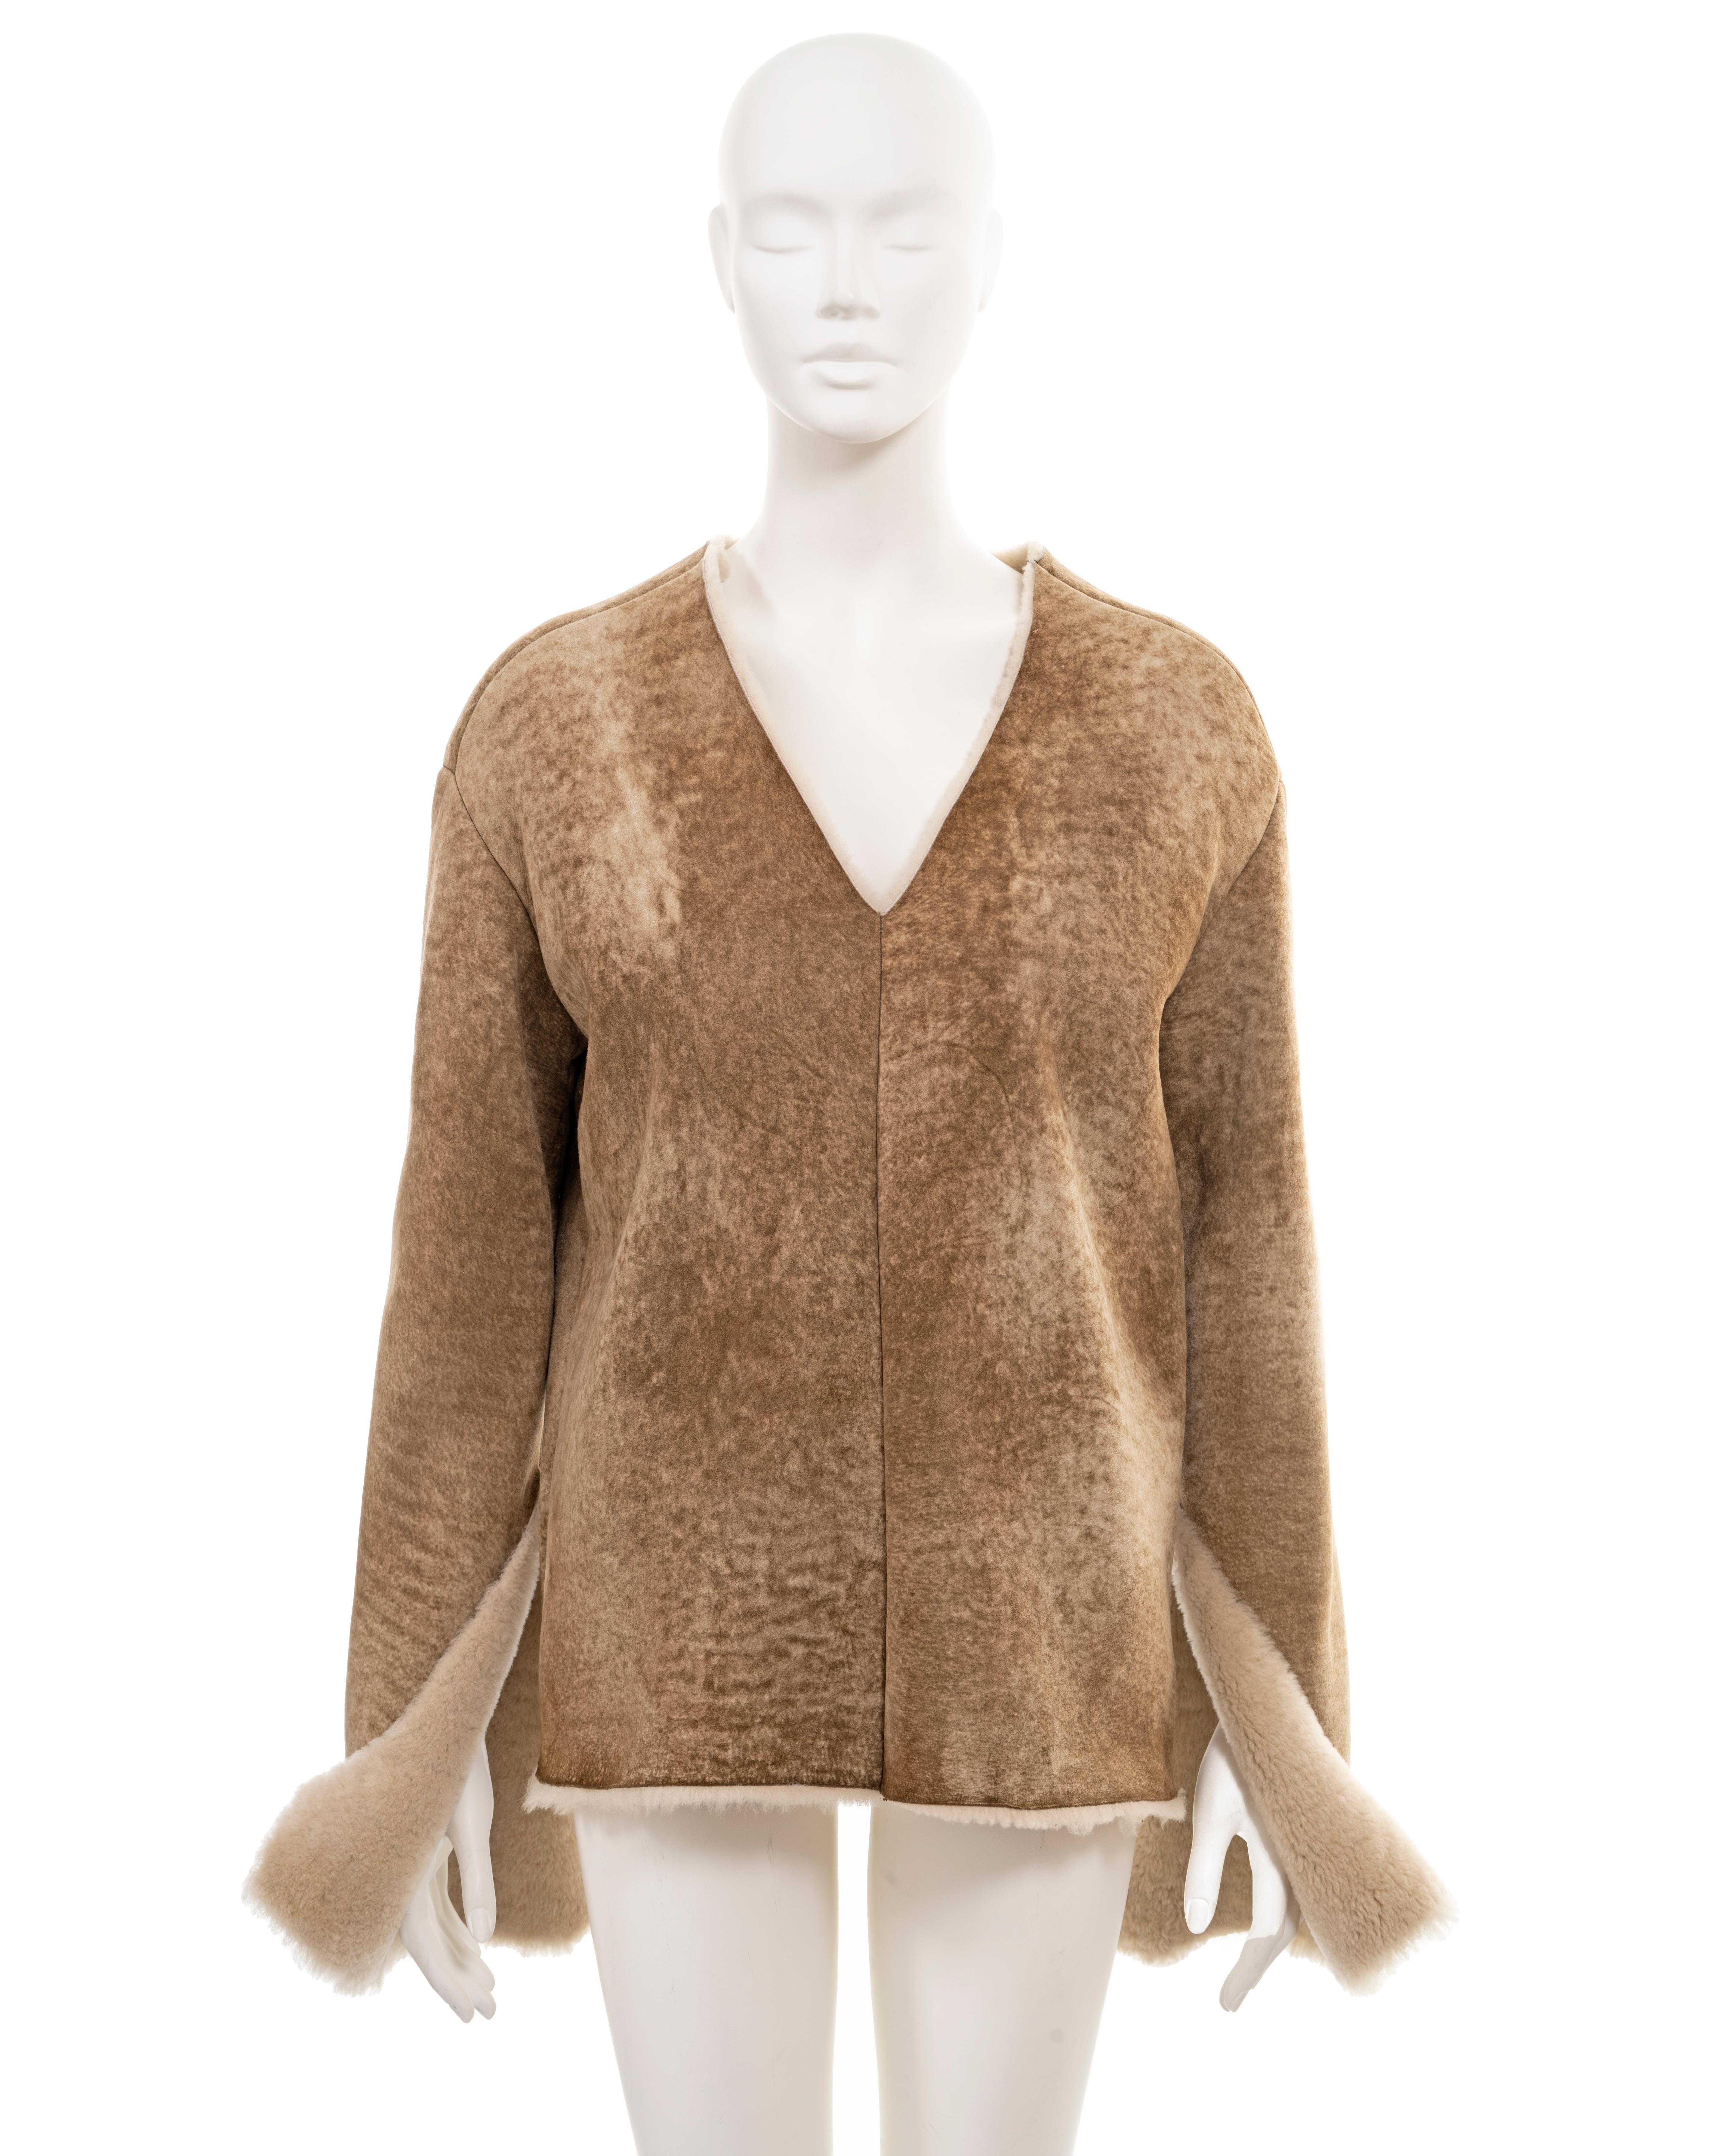 ▪ Ruffo Research shearling pullover sweater 
▪ Creative Director: A.F. Vandevorst
▪ Sold by One of a Kind Archive
▪ Fall-Winter 2000
▪ Ruffo is a luxury leather company founded by Ruffo Corsi in 1966 and has since produced leather pieces for